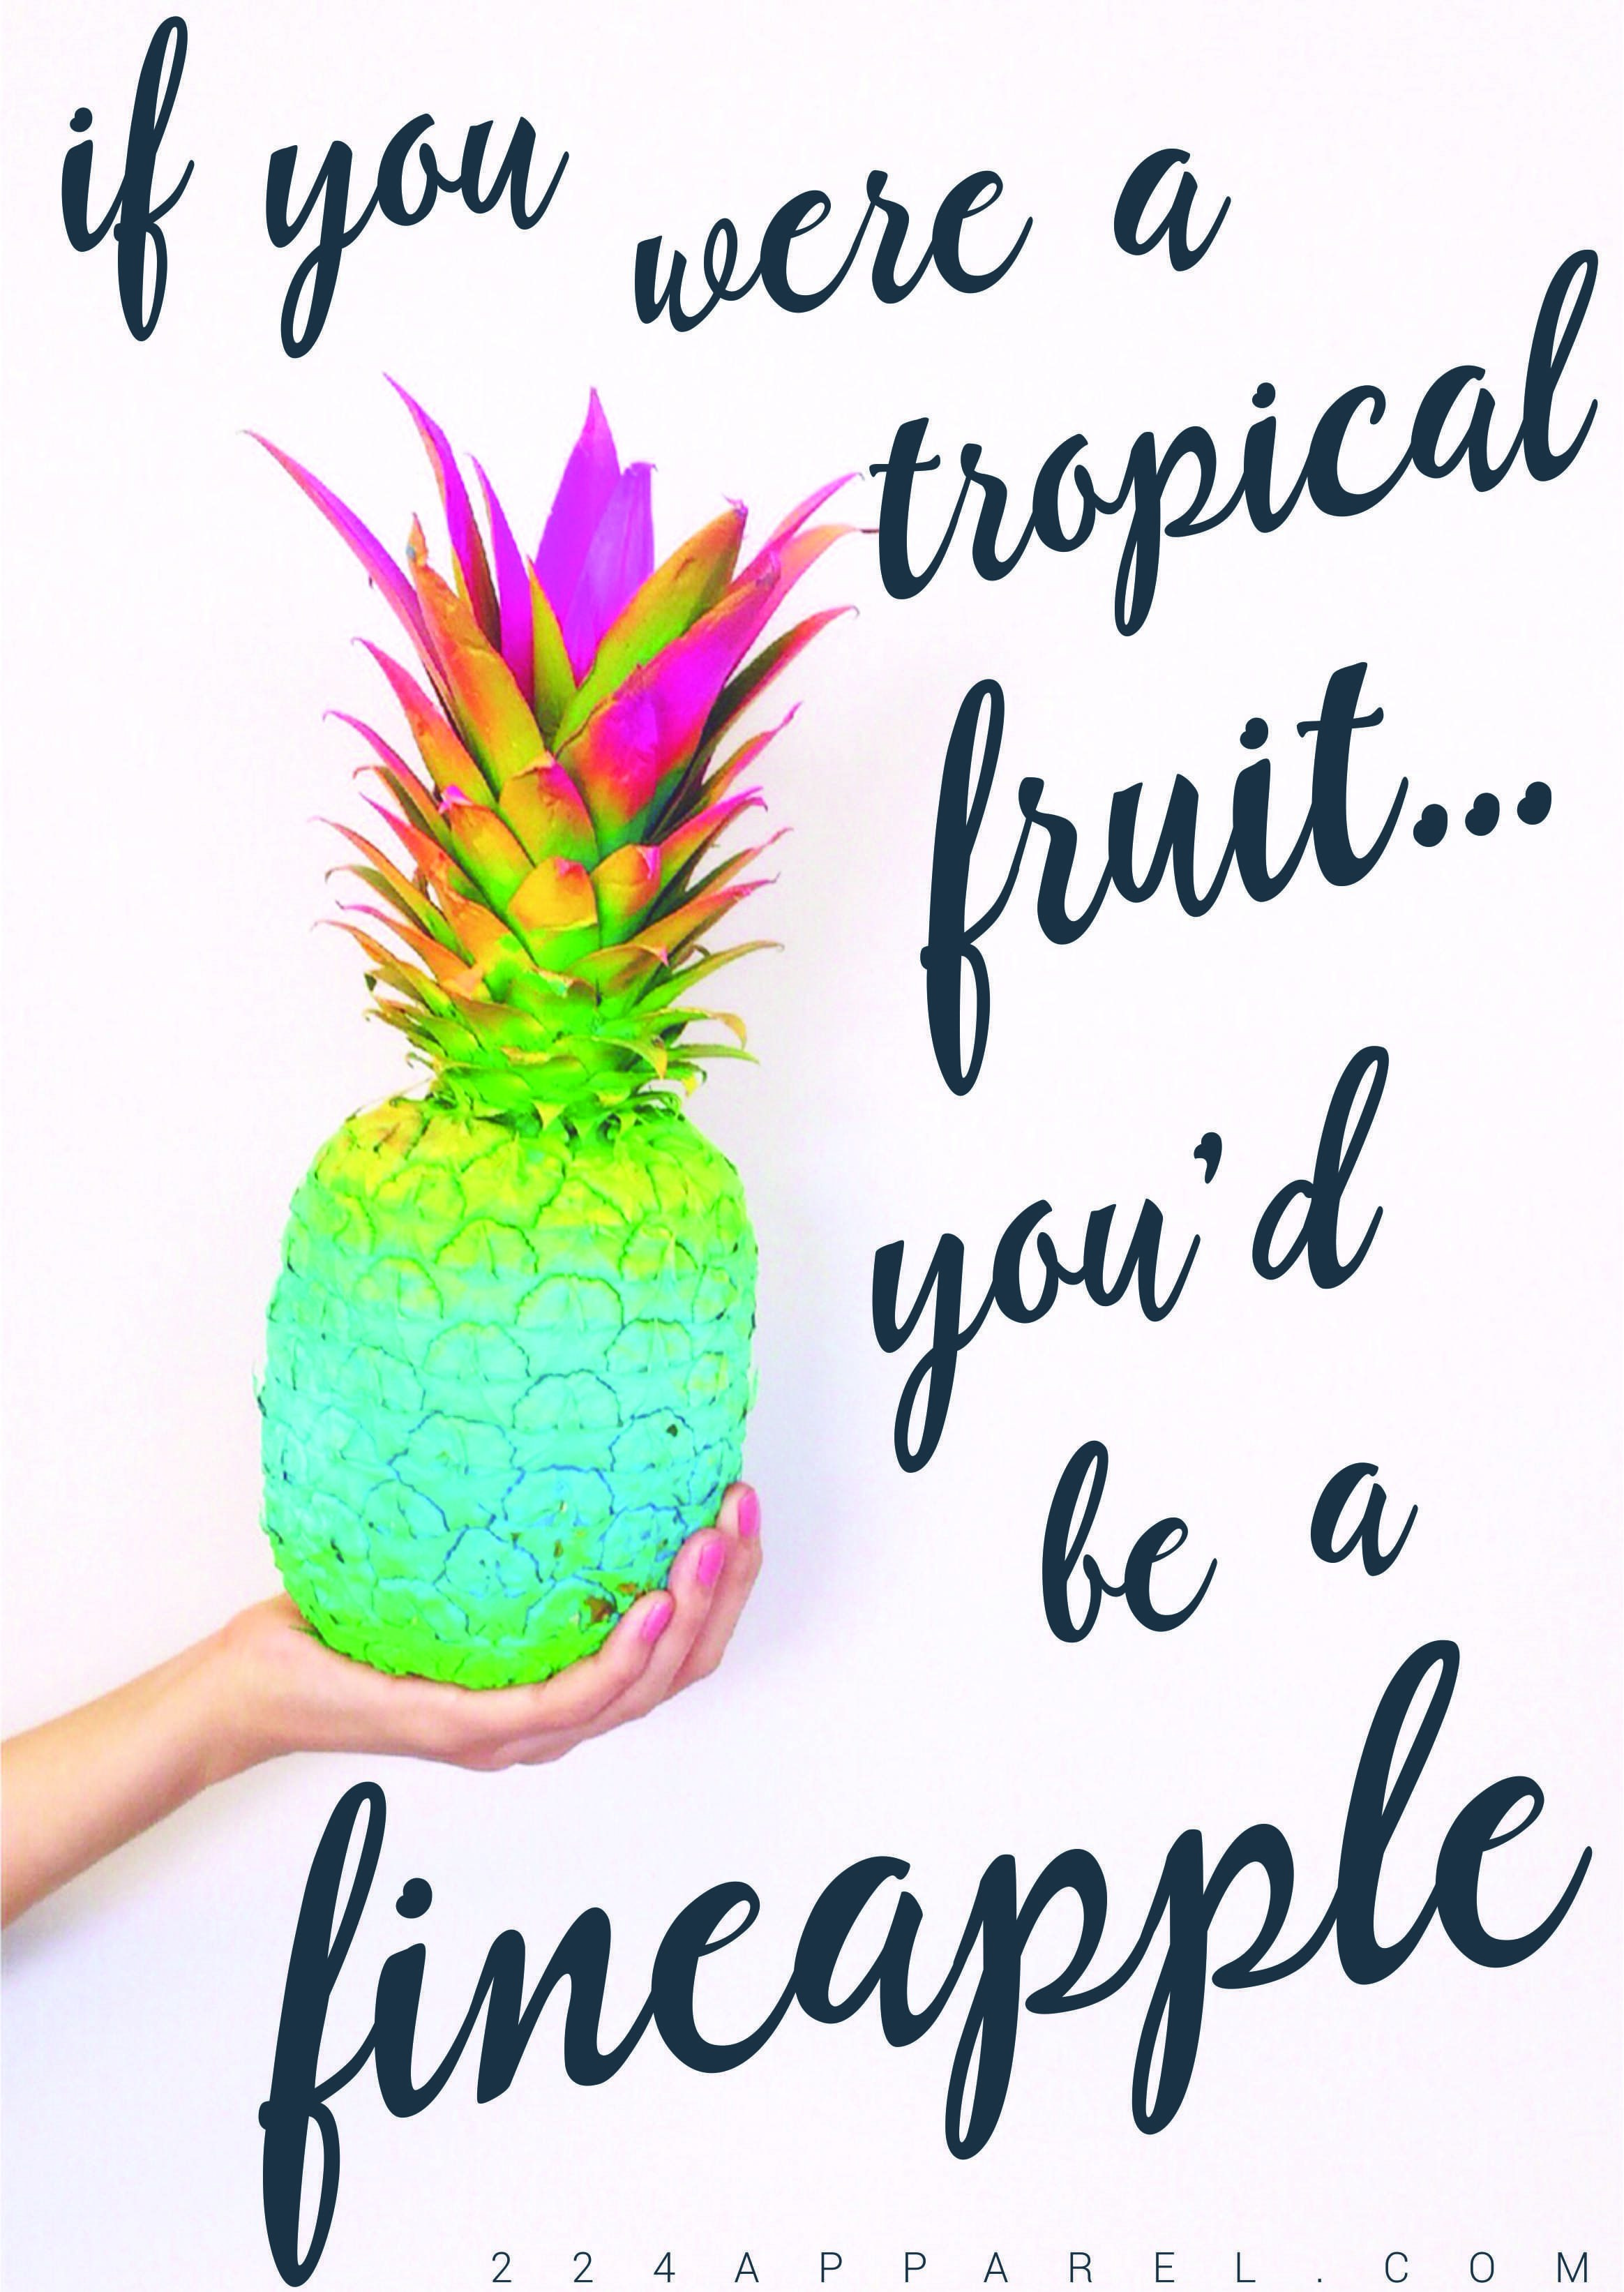 If You Were a Tropical Fruit. Tropical quotes, Fruit quotes